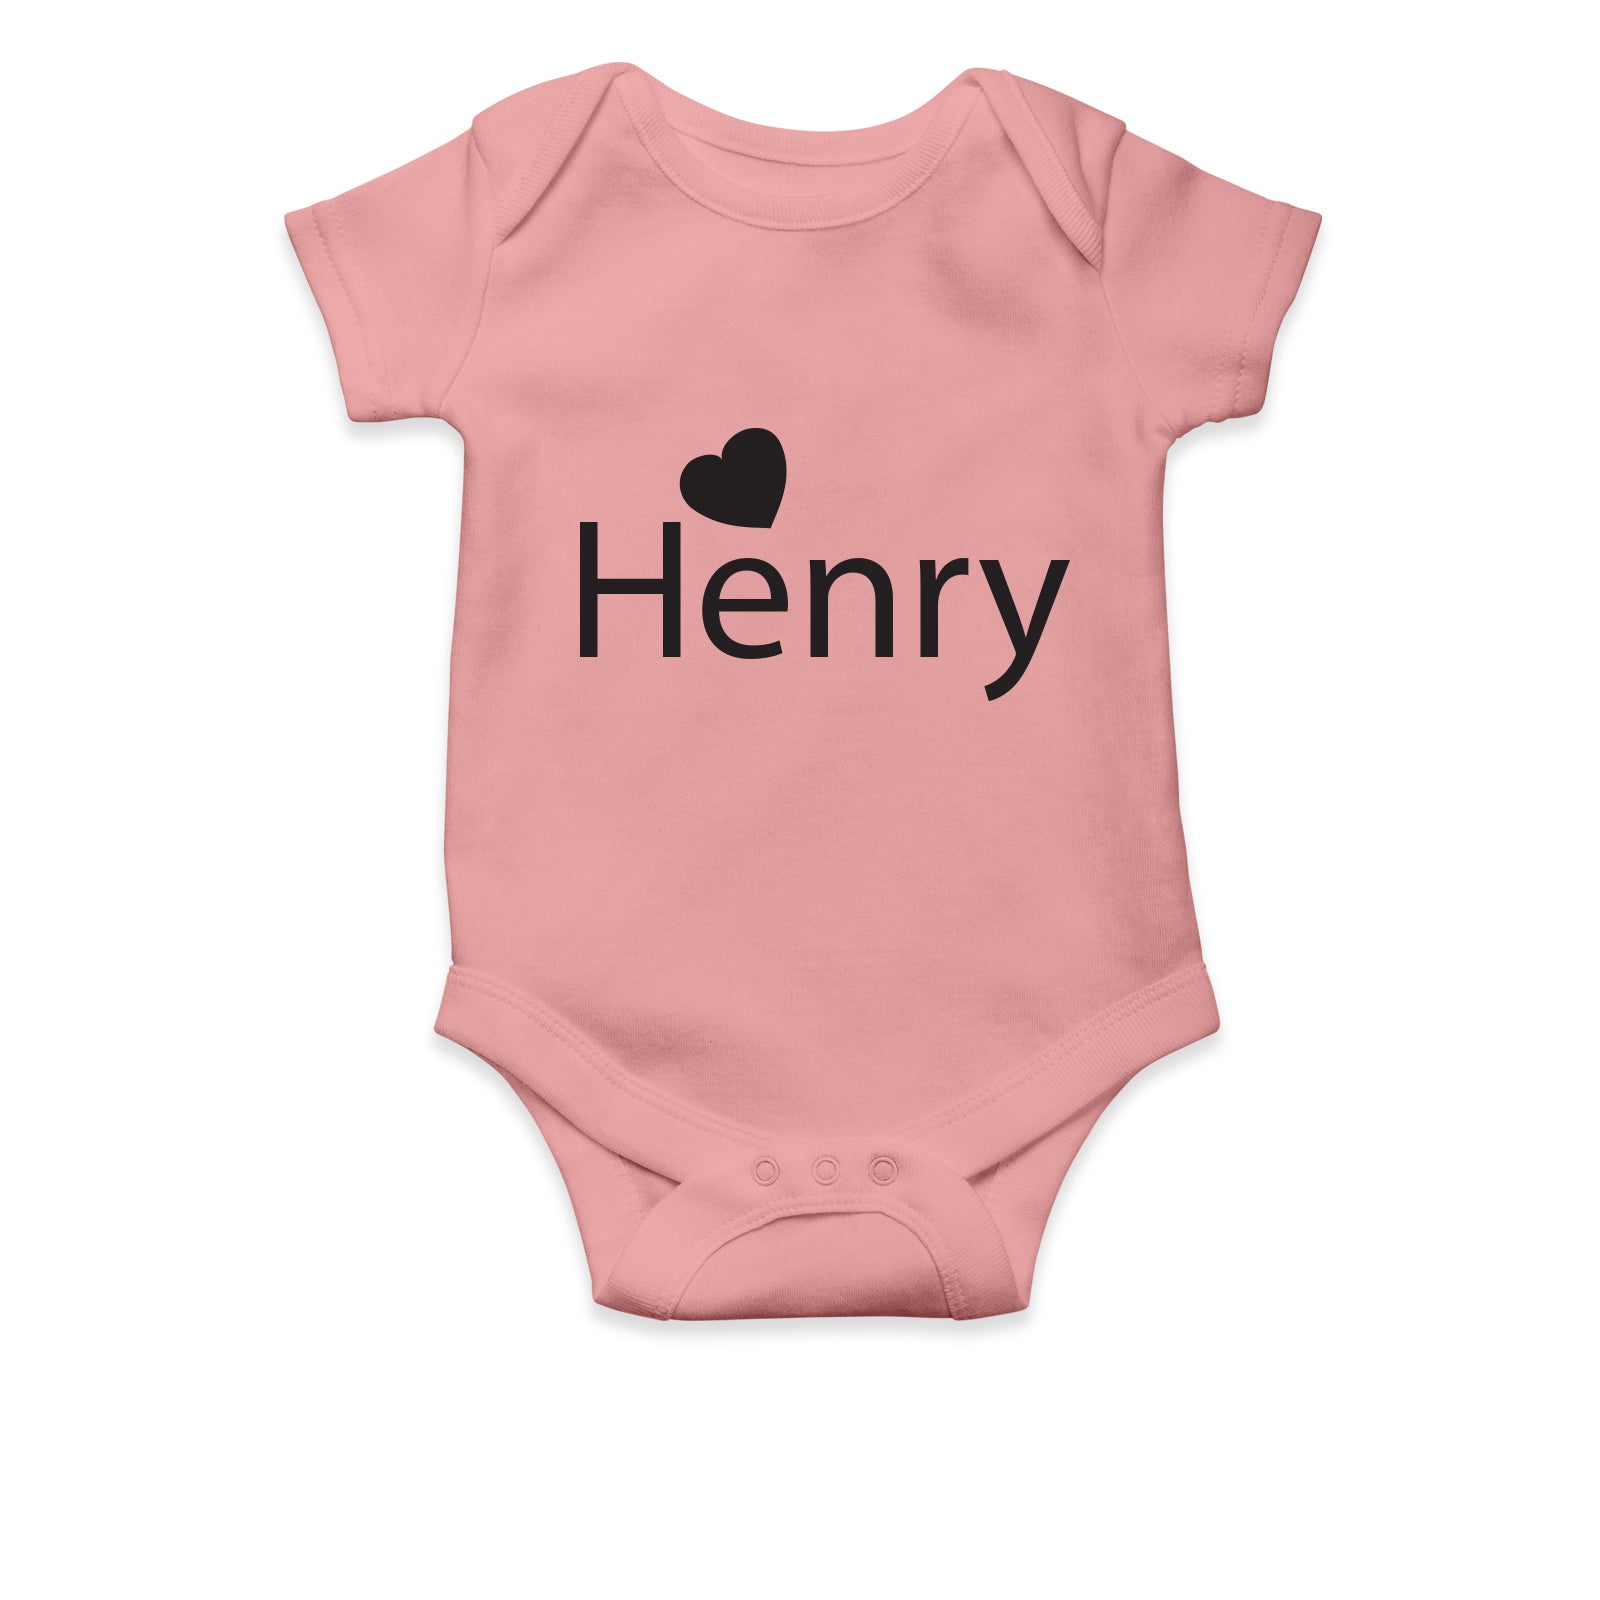 Personalised White Baby Body Suit Grow Vest - Love Heart!